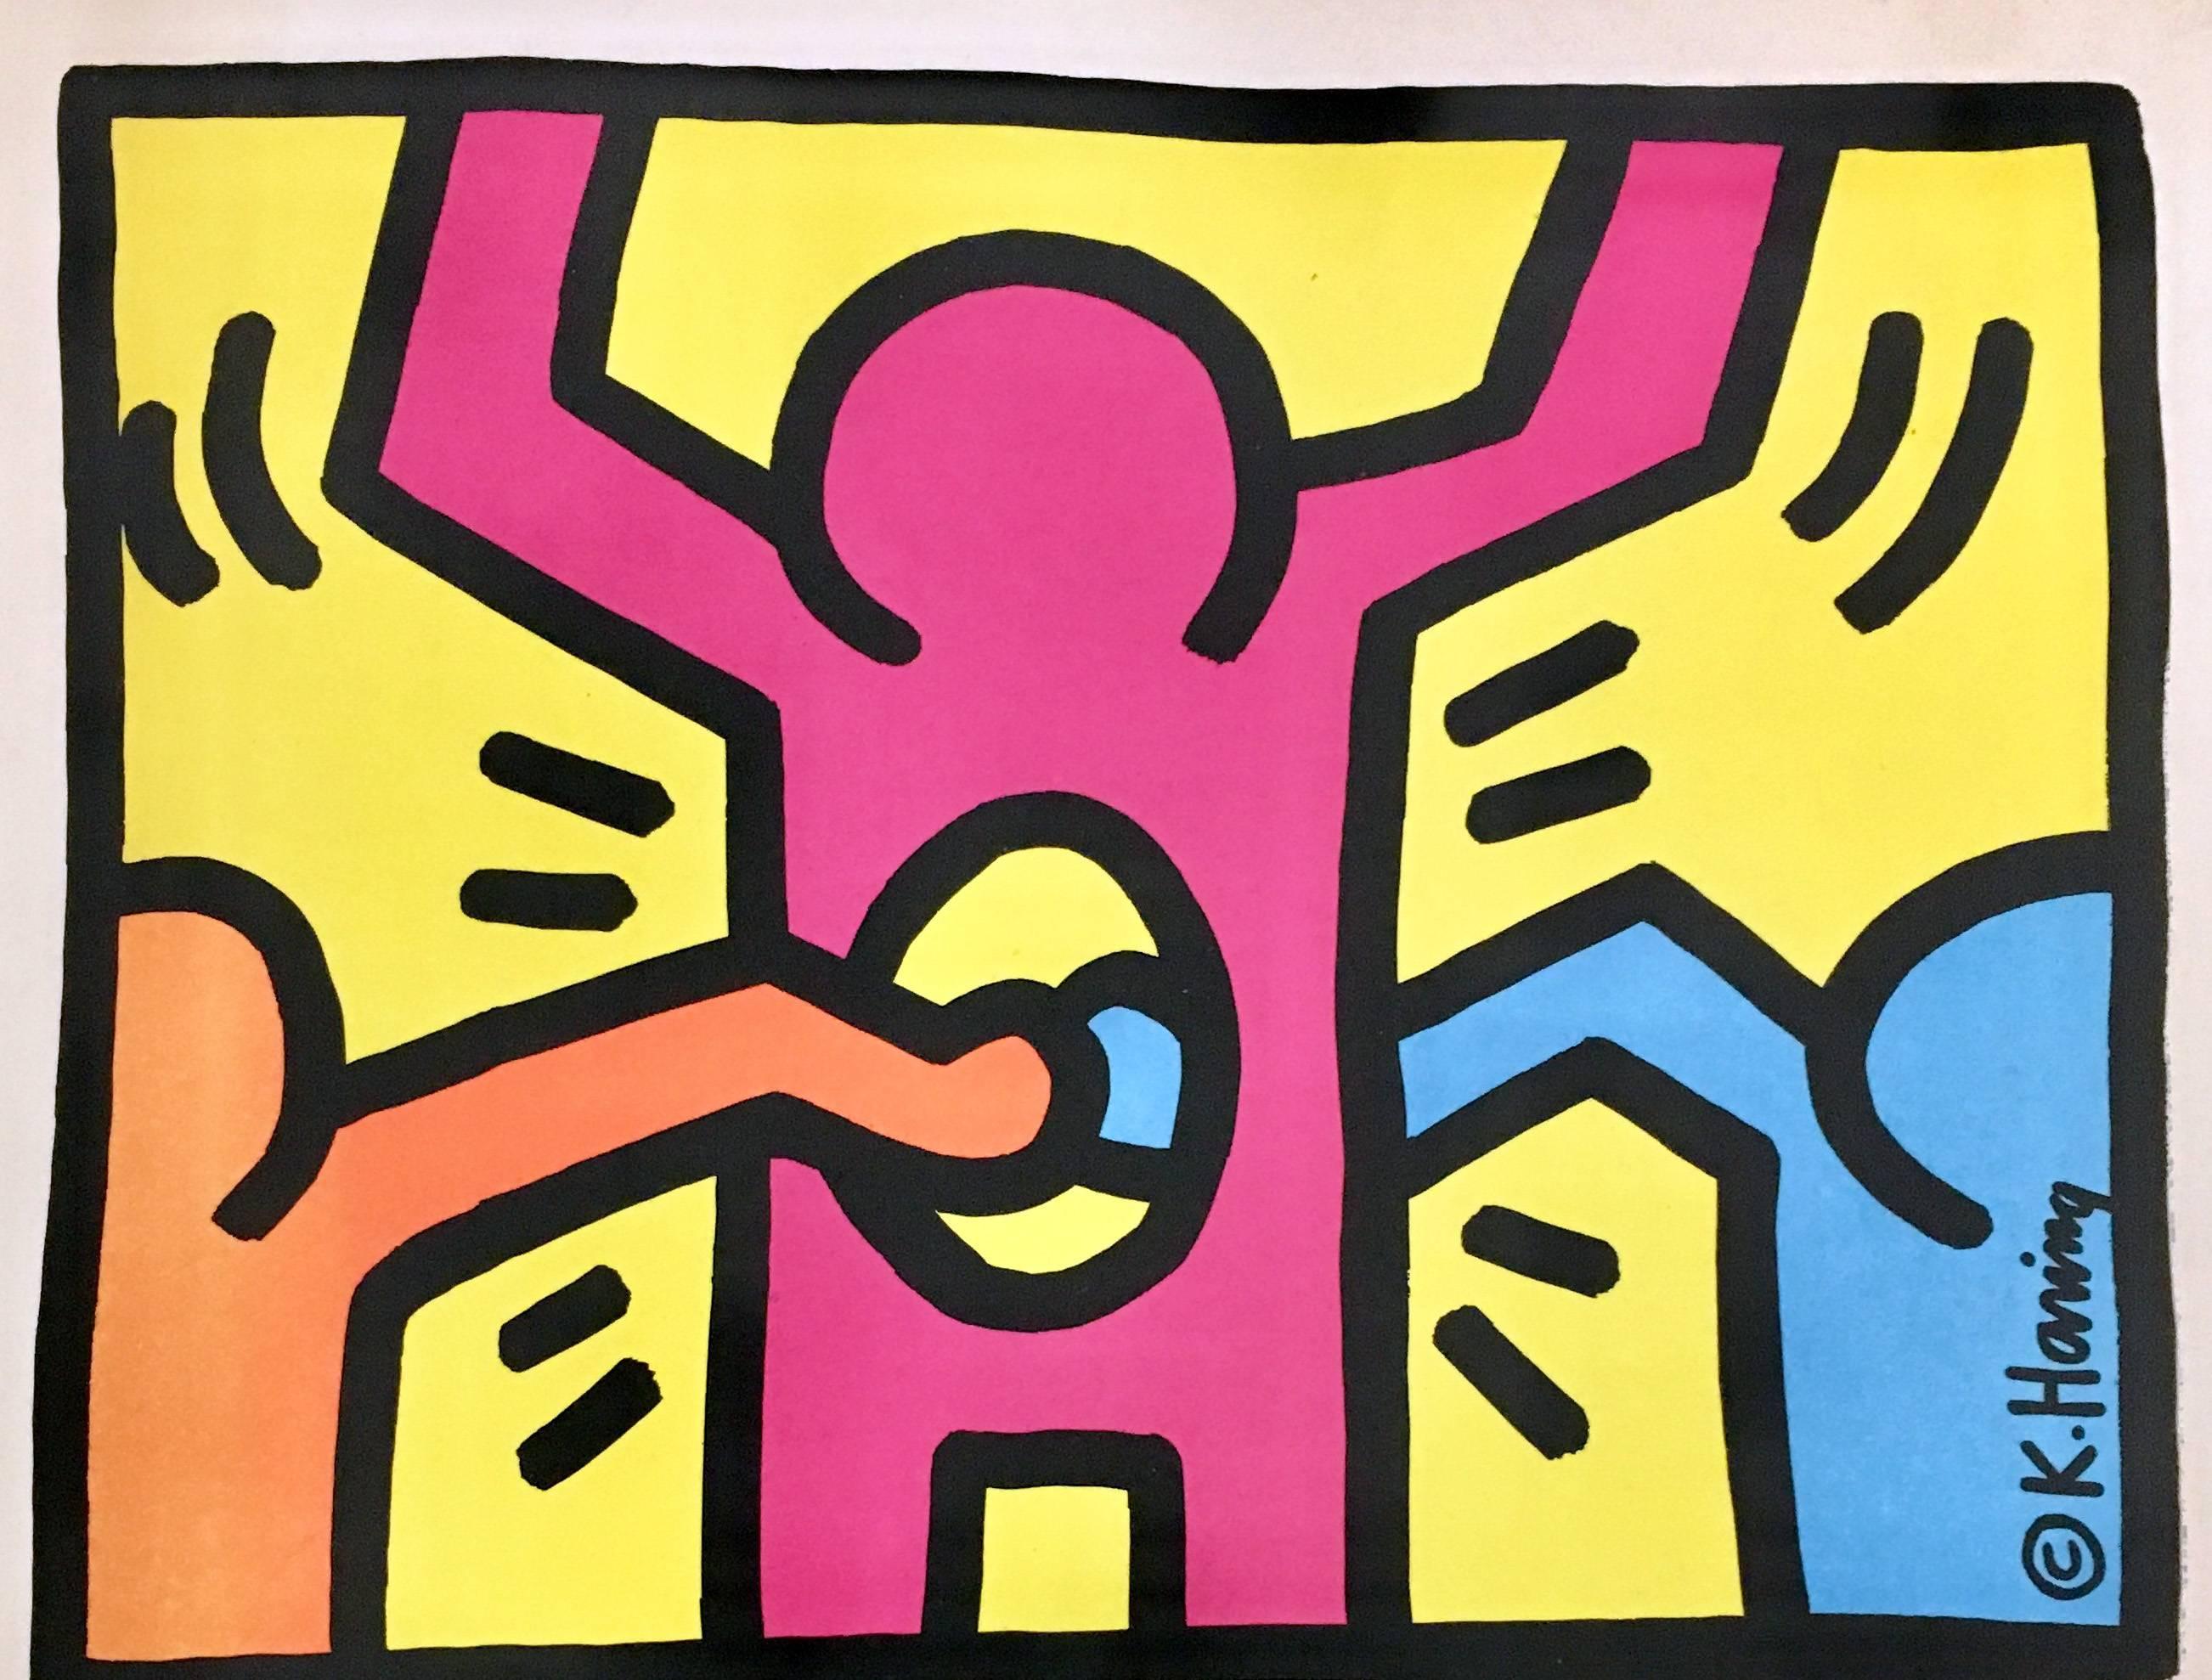 Keith Haring Stedelijk Museum, Amsterdam, Netherlands, March 15th – 12th May, 1986:

The rare, much sought-after catalog to Keith Haring's first major solo museum show. Features beautifully silkscreened front and back cover with crisp, bright